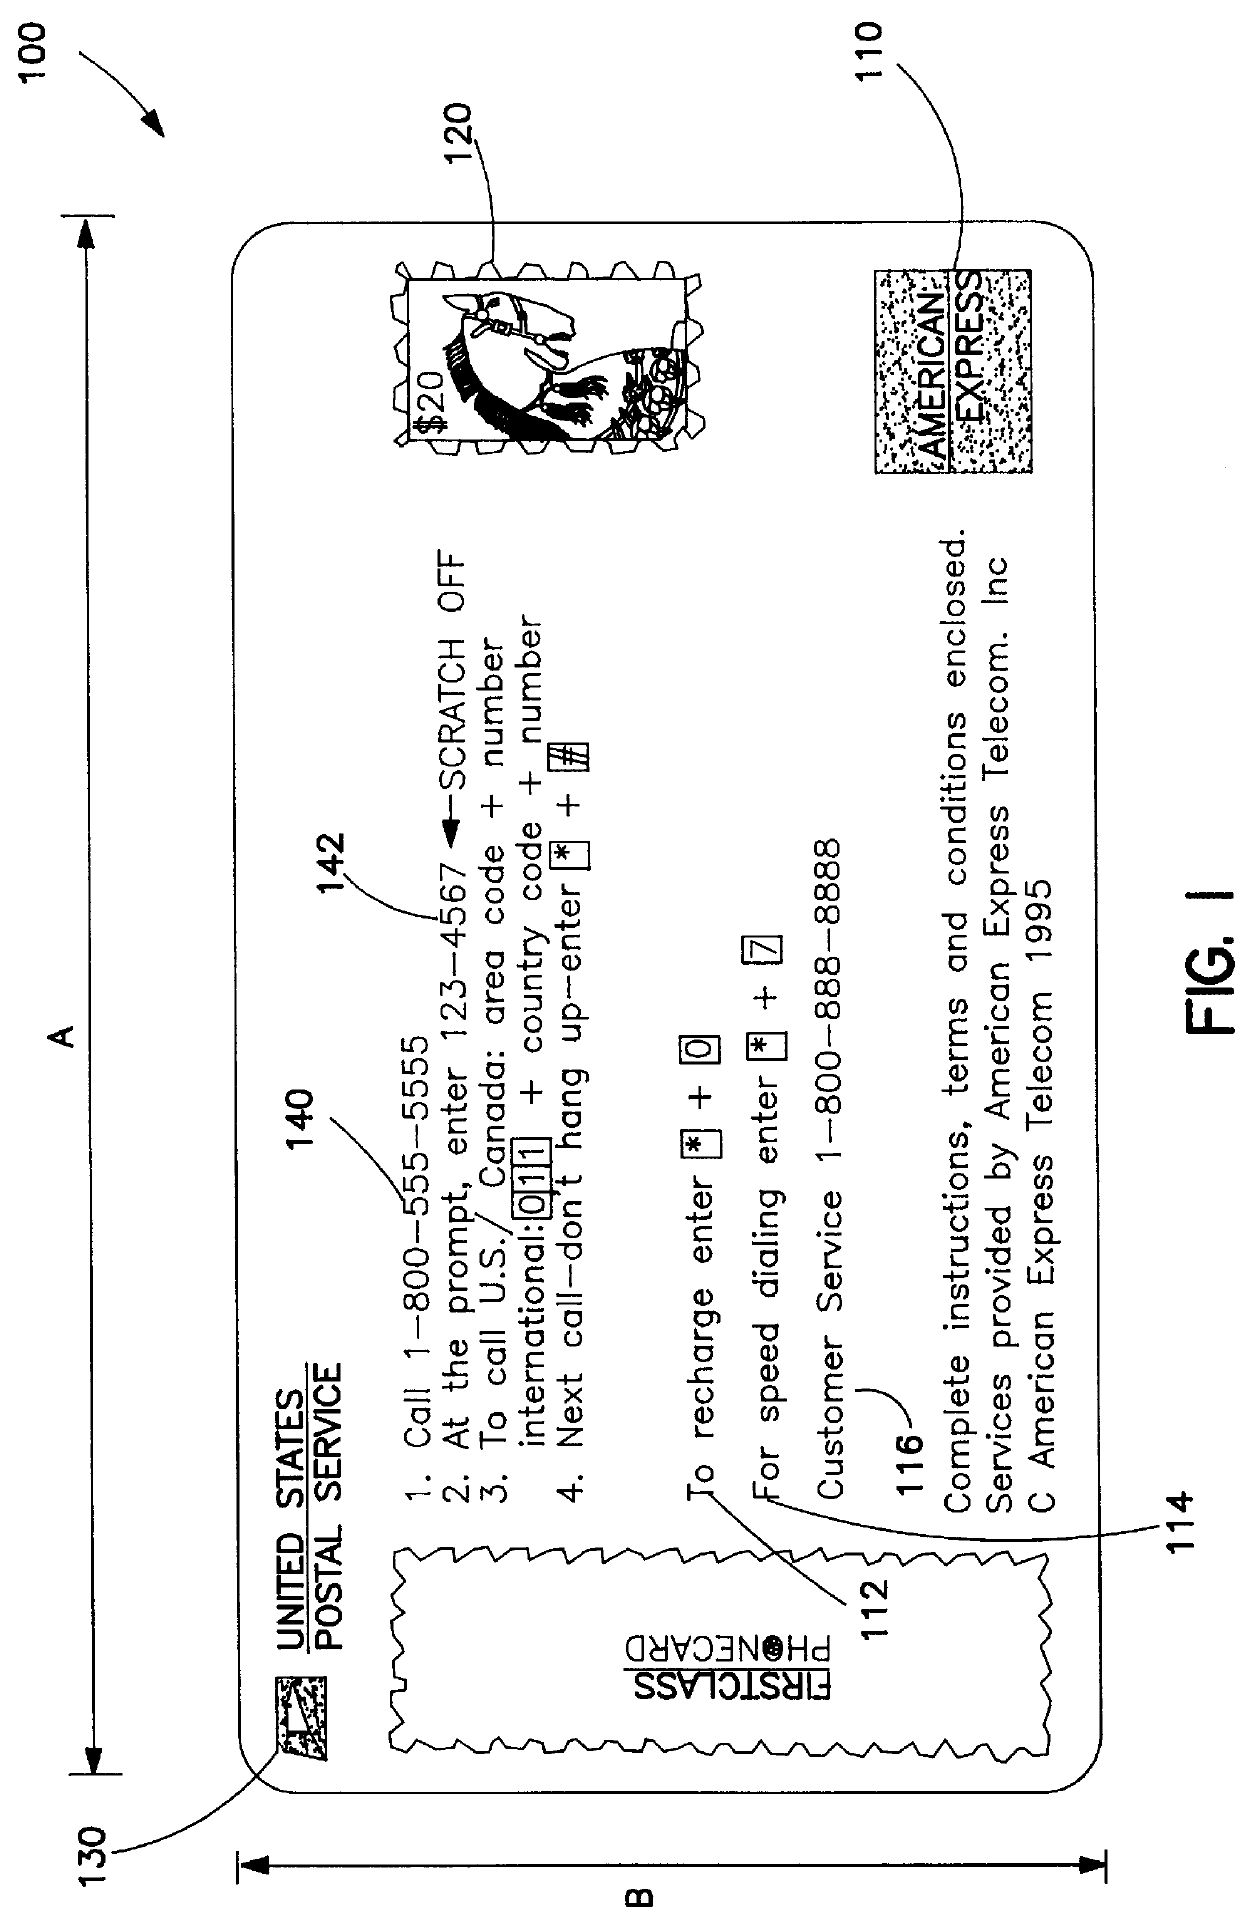 Methods and apparatus for language registration of prepaid, remote entry customer account